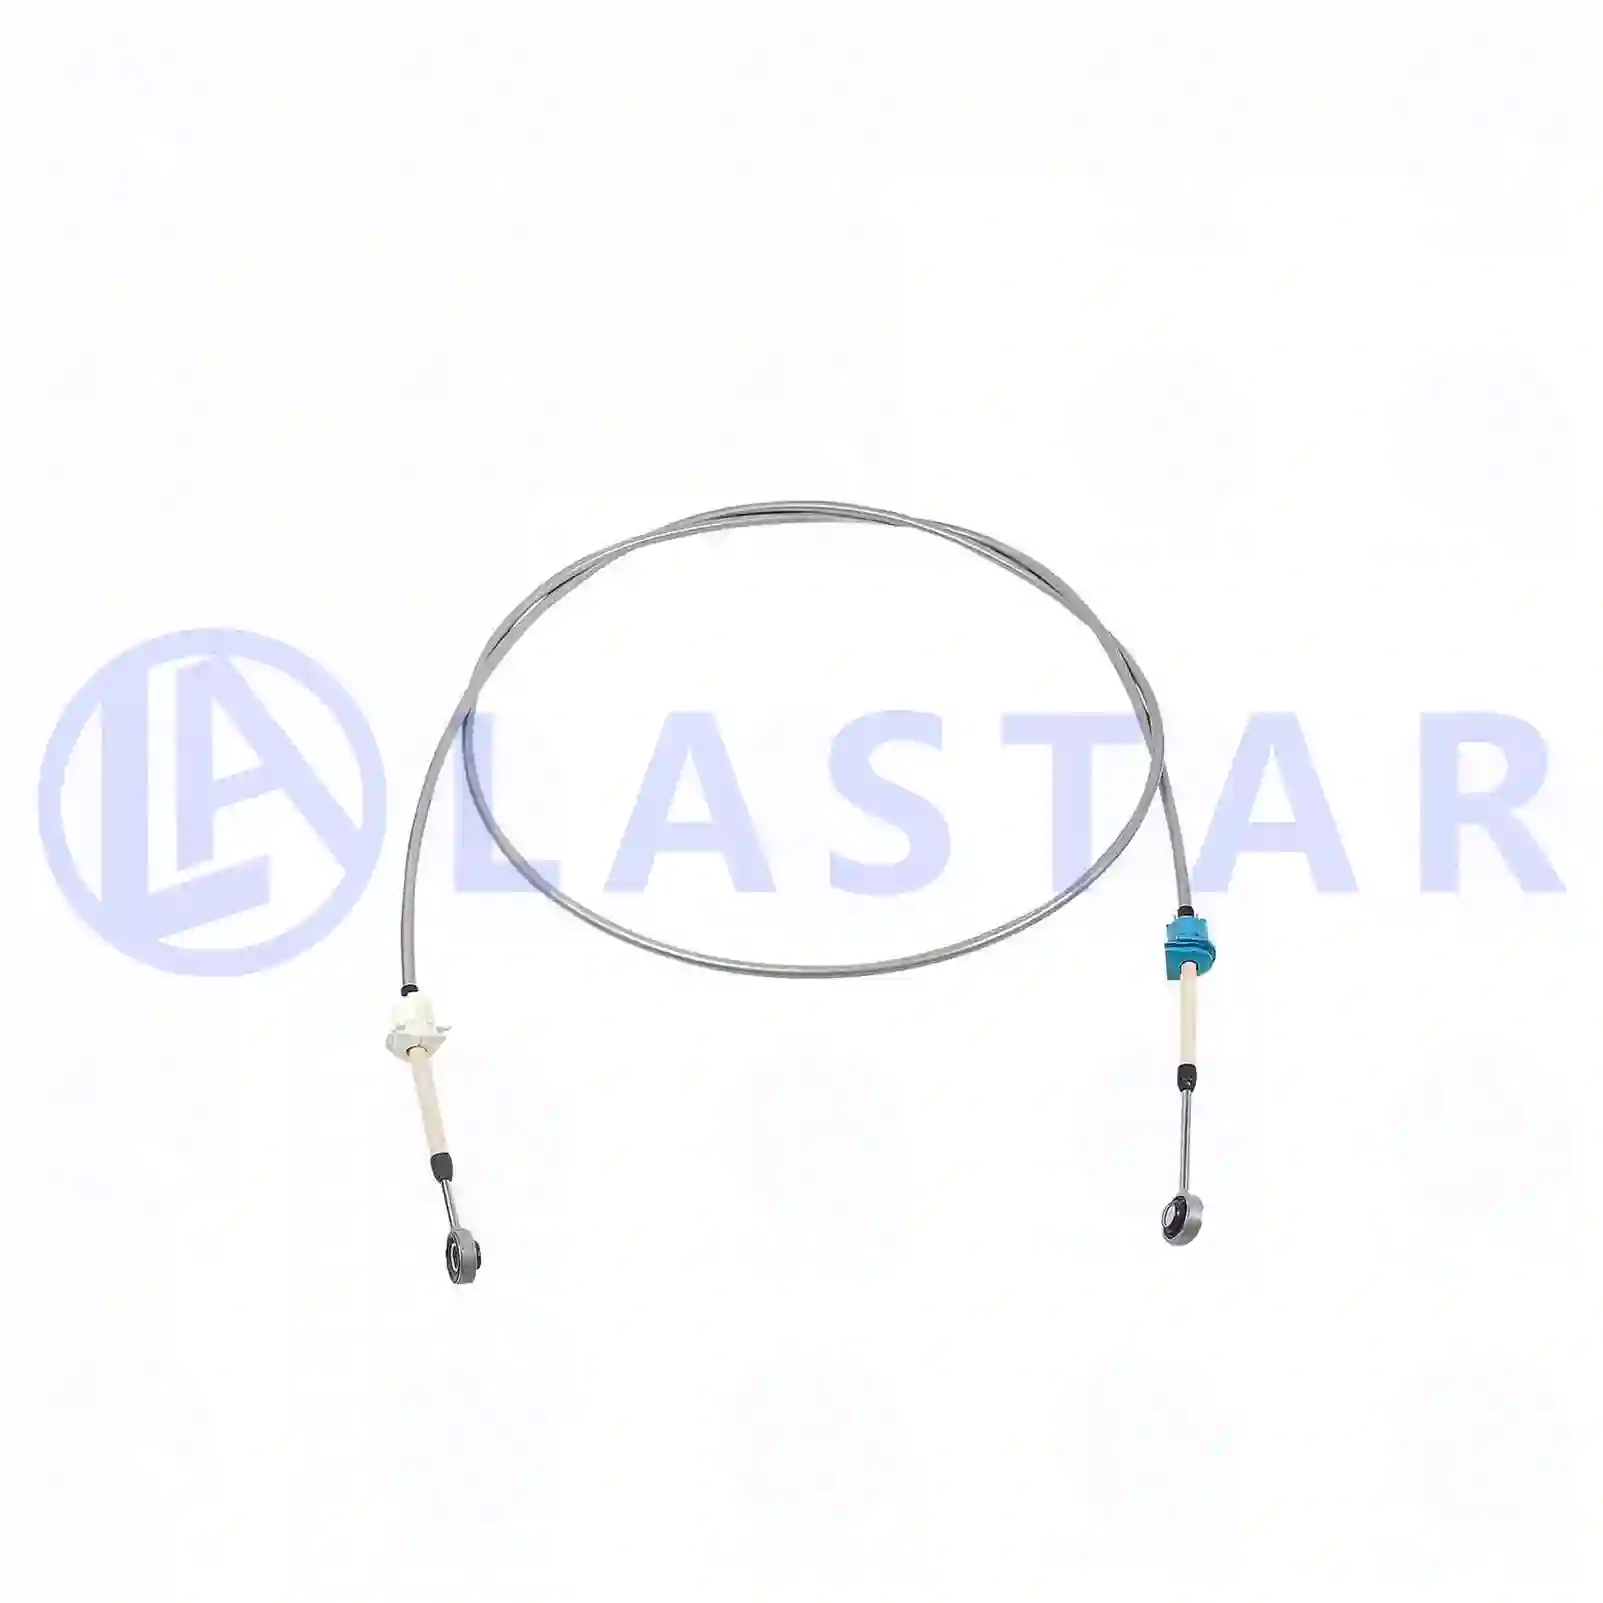 Control cable, switching, 77732444, 20545957, 20702957, 21002857, 21343557, 21789673 ||  77732444 Lastar Spare Part | Truck Spare Parts, Auotomotive Spare Parts Control cable, switching, 77732444, 20545957, 20702957, 21002857, 21343557, 21789673 ||  77732444 Lastar Spare Part | Truck Spare Parts, Auotomotive Spare Parts